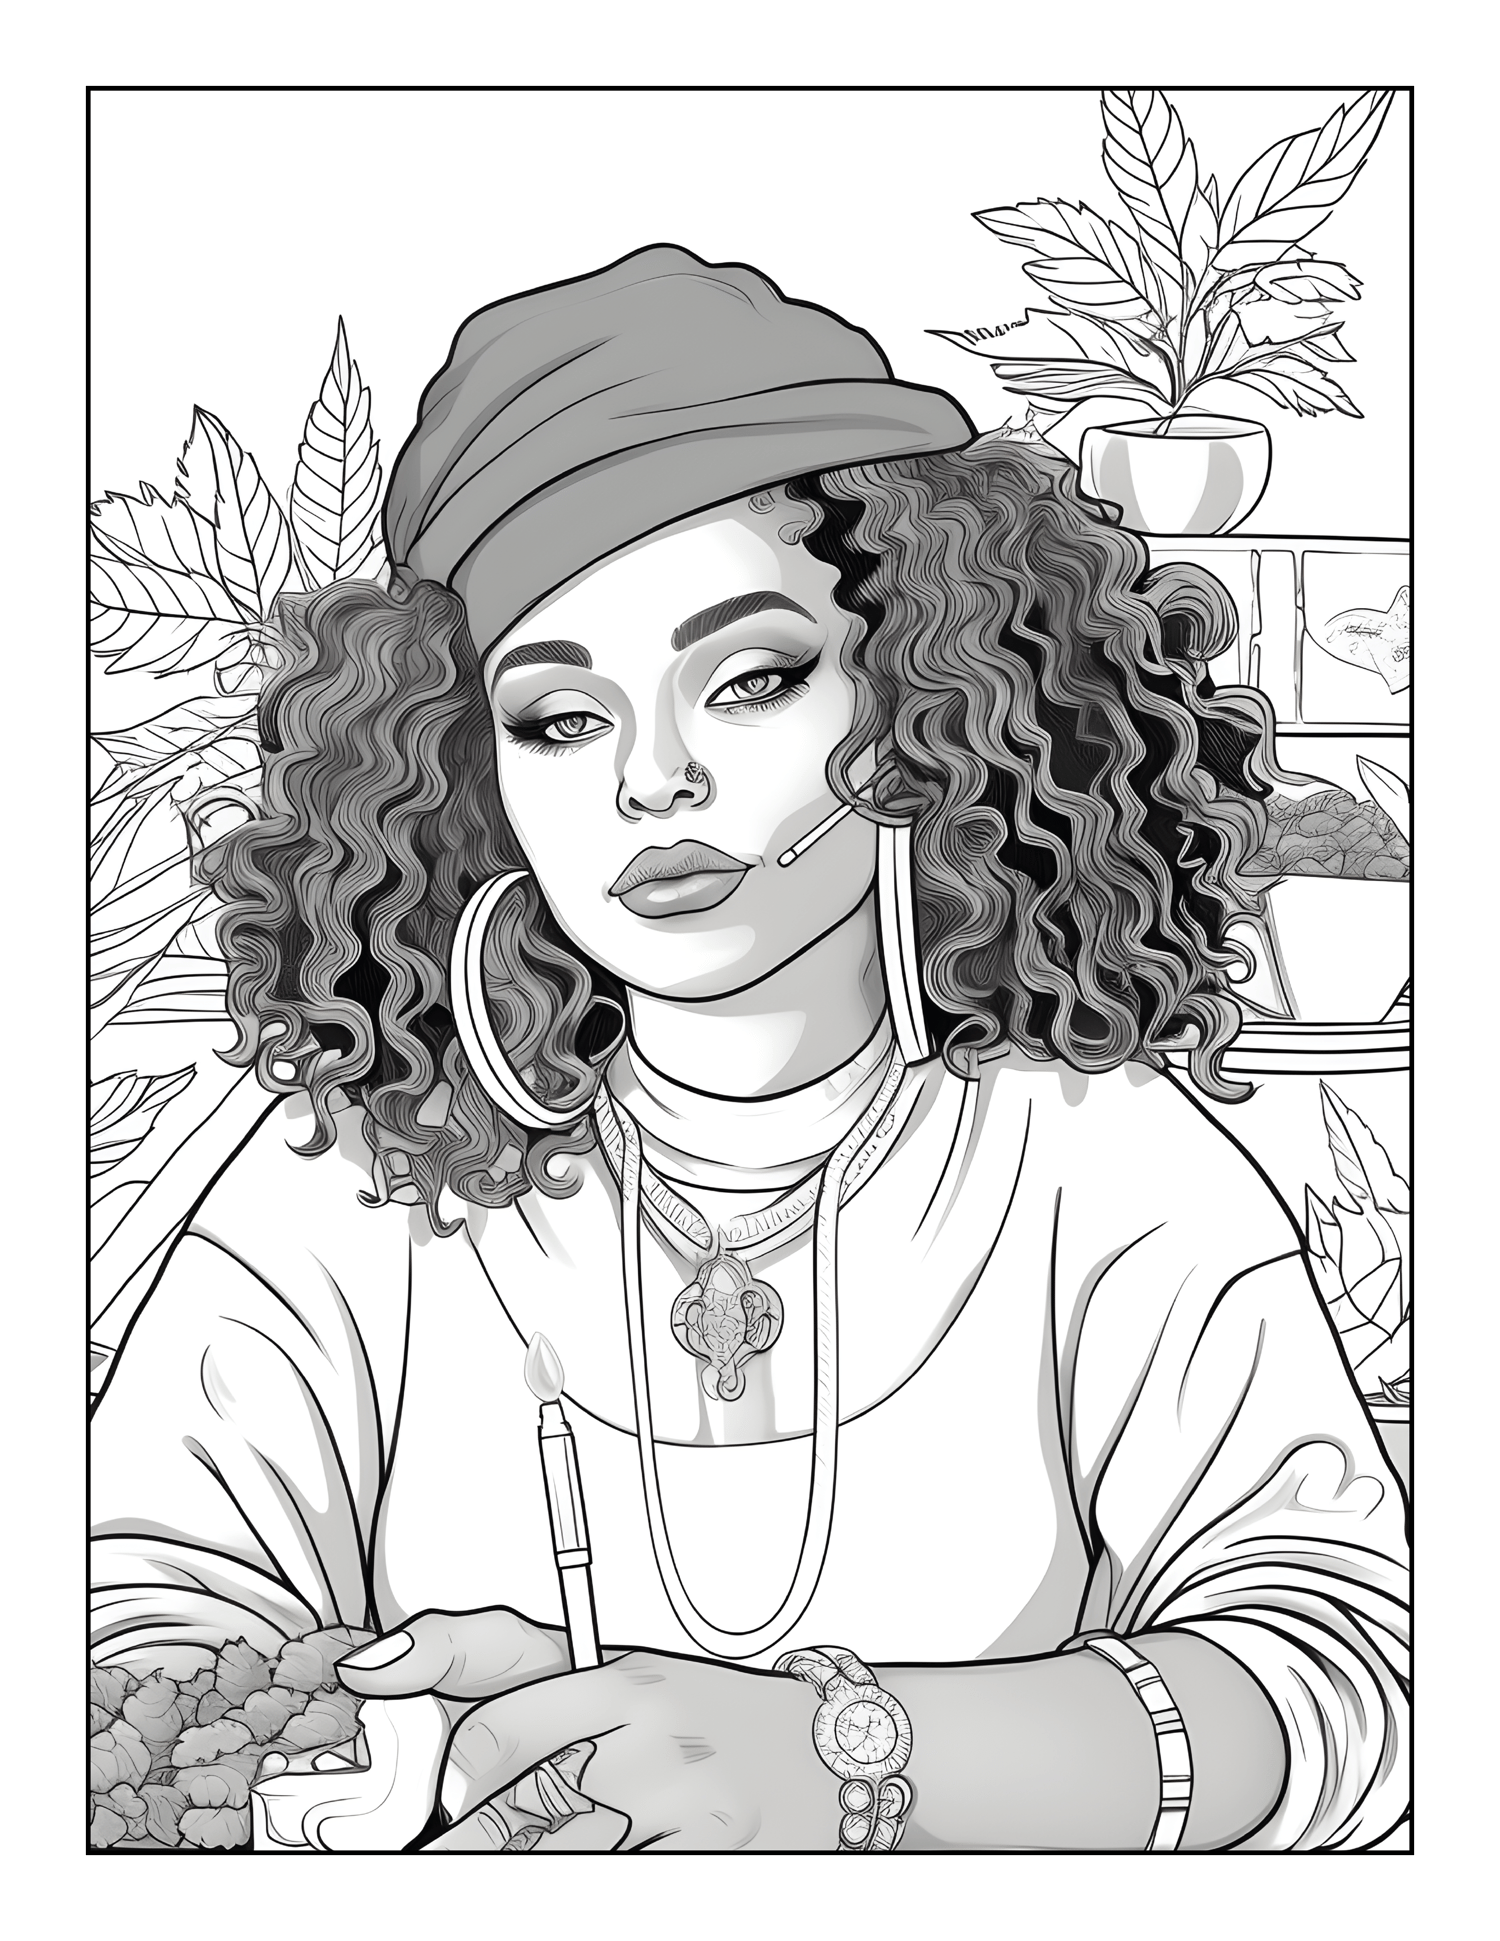 Stoner coloring book for adults - Payhip